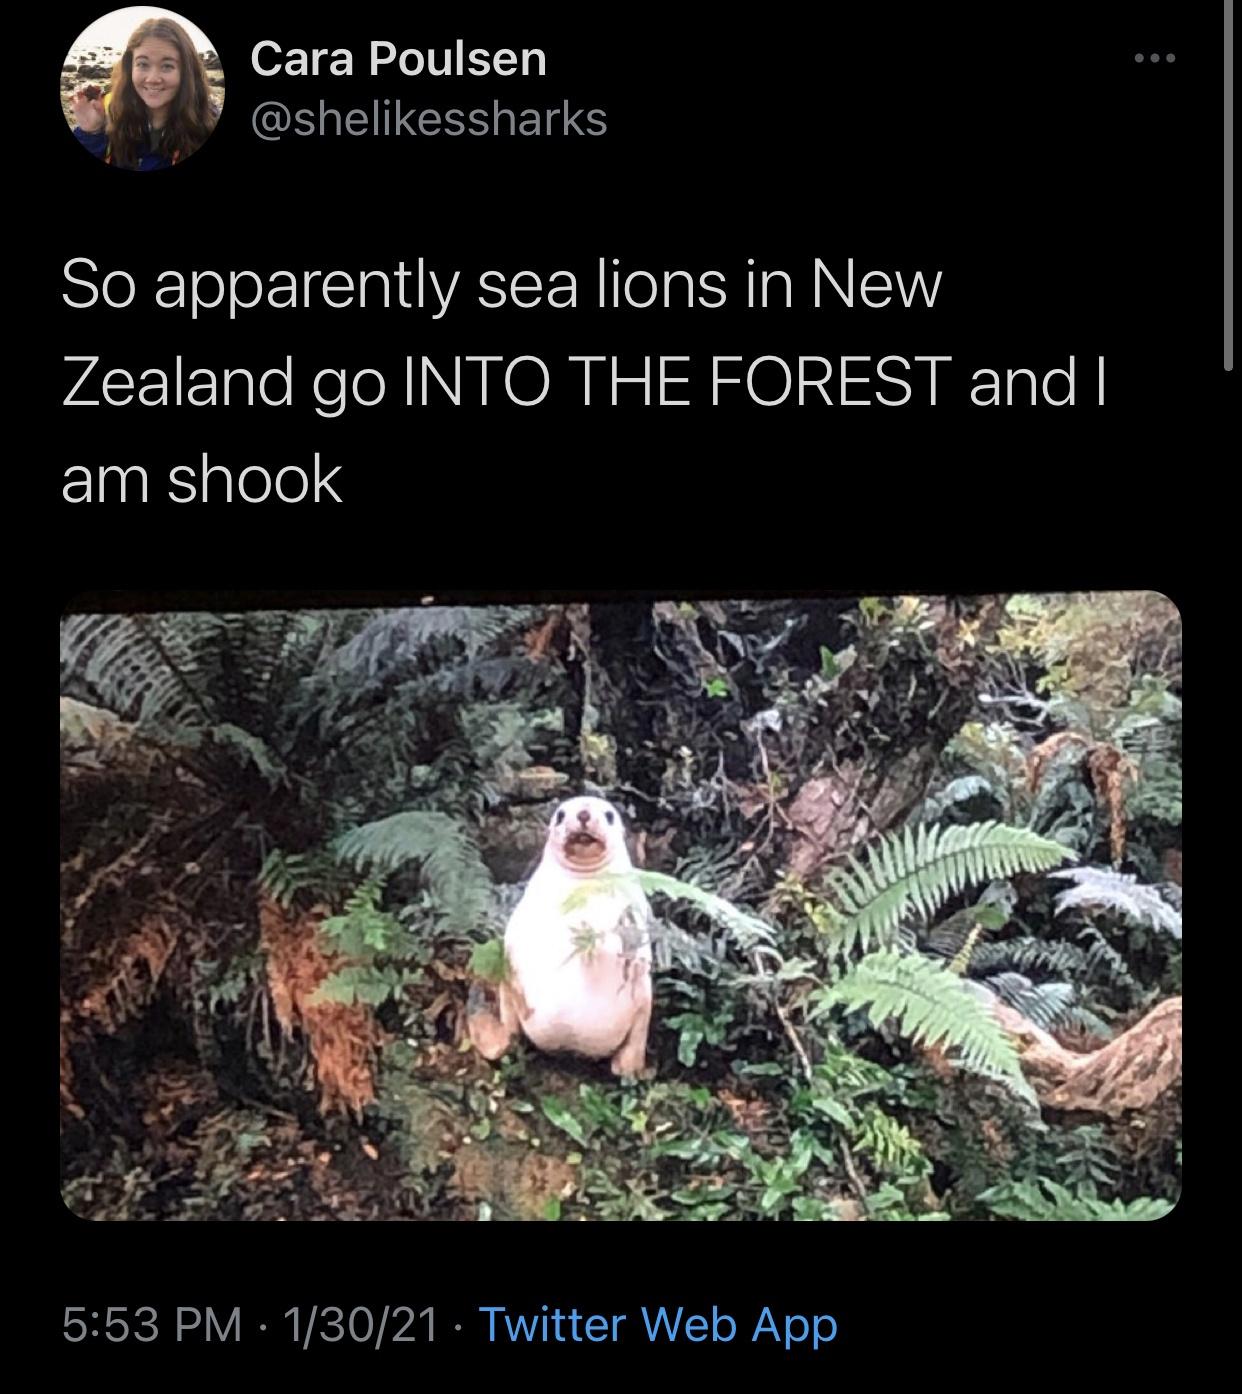 funny twitter jokes - So apparently sea lions in New Zealand go Into The Forest and I am shook